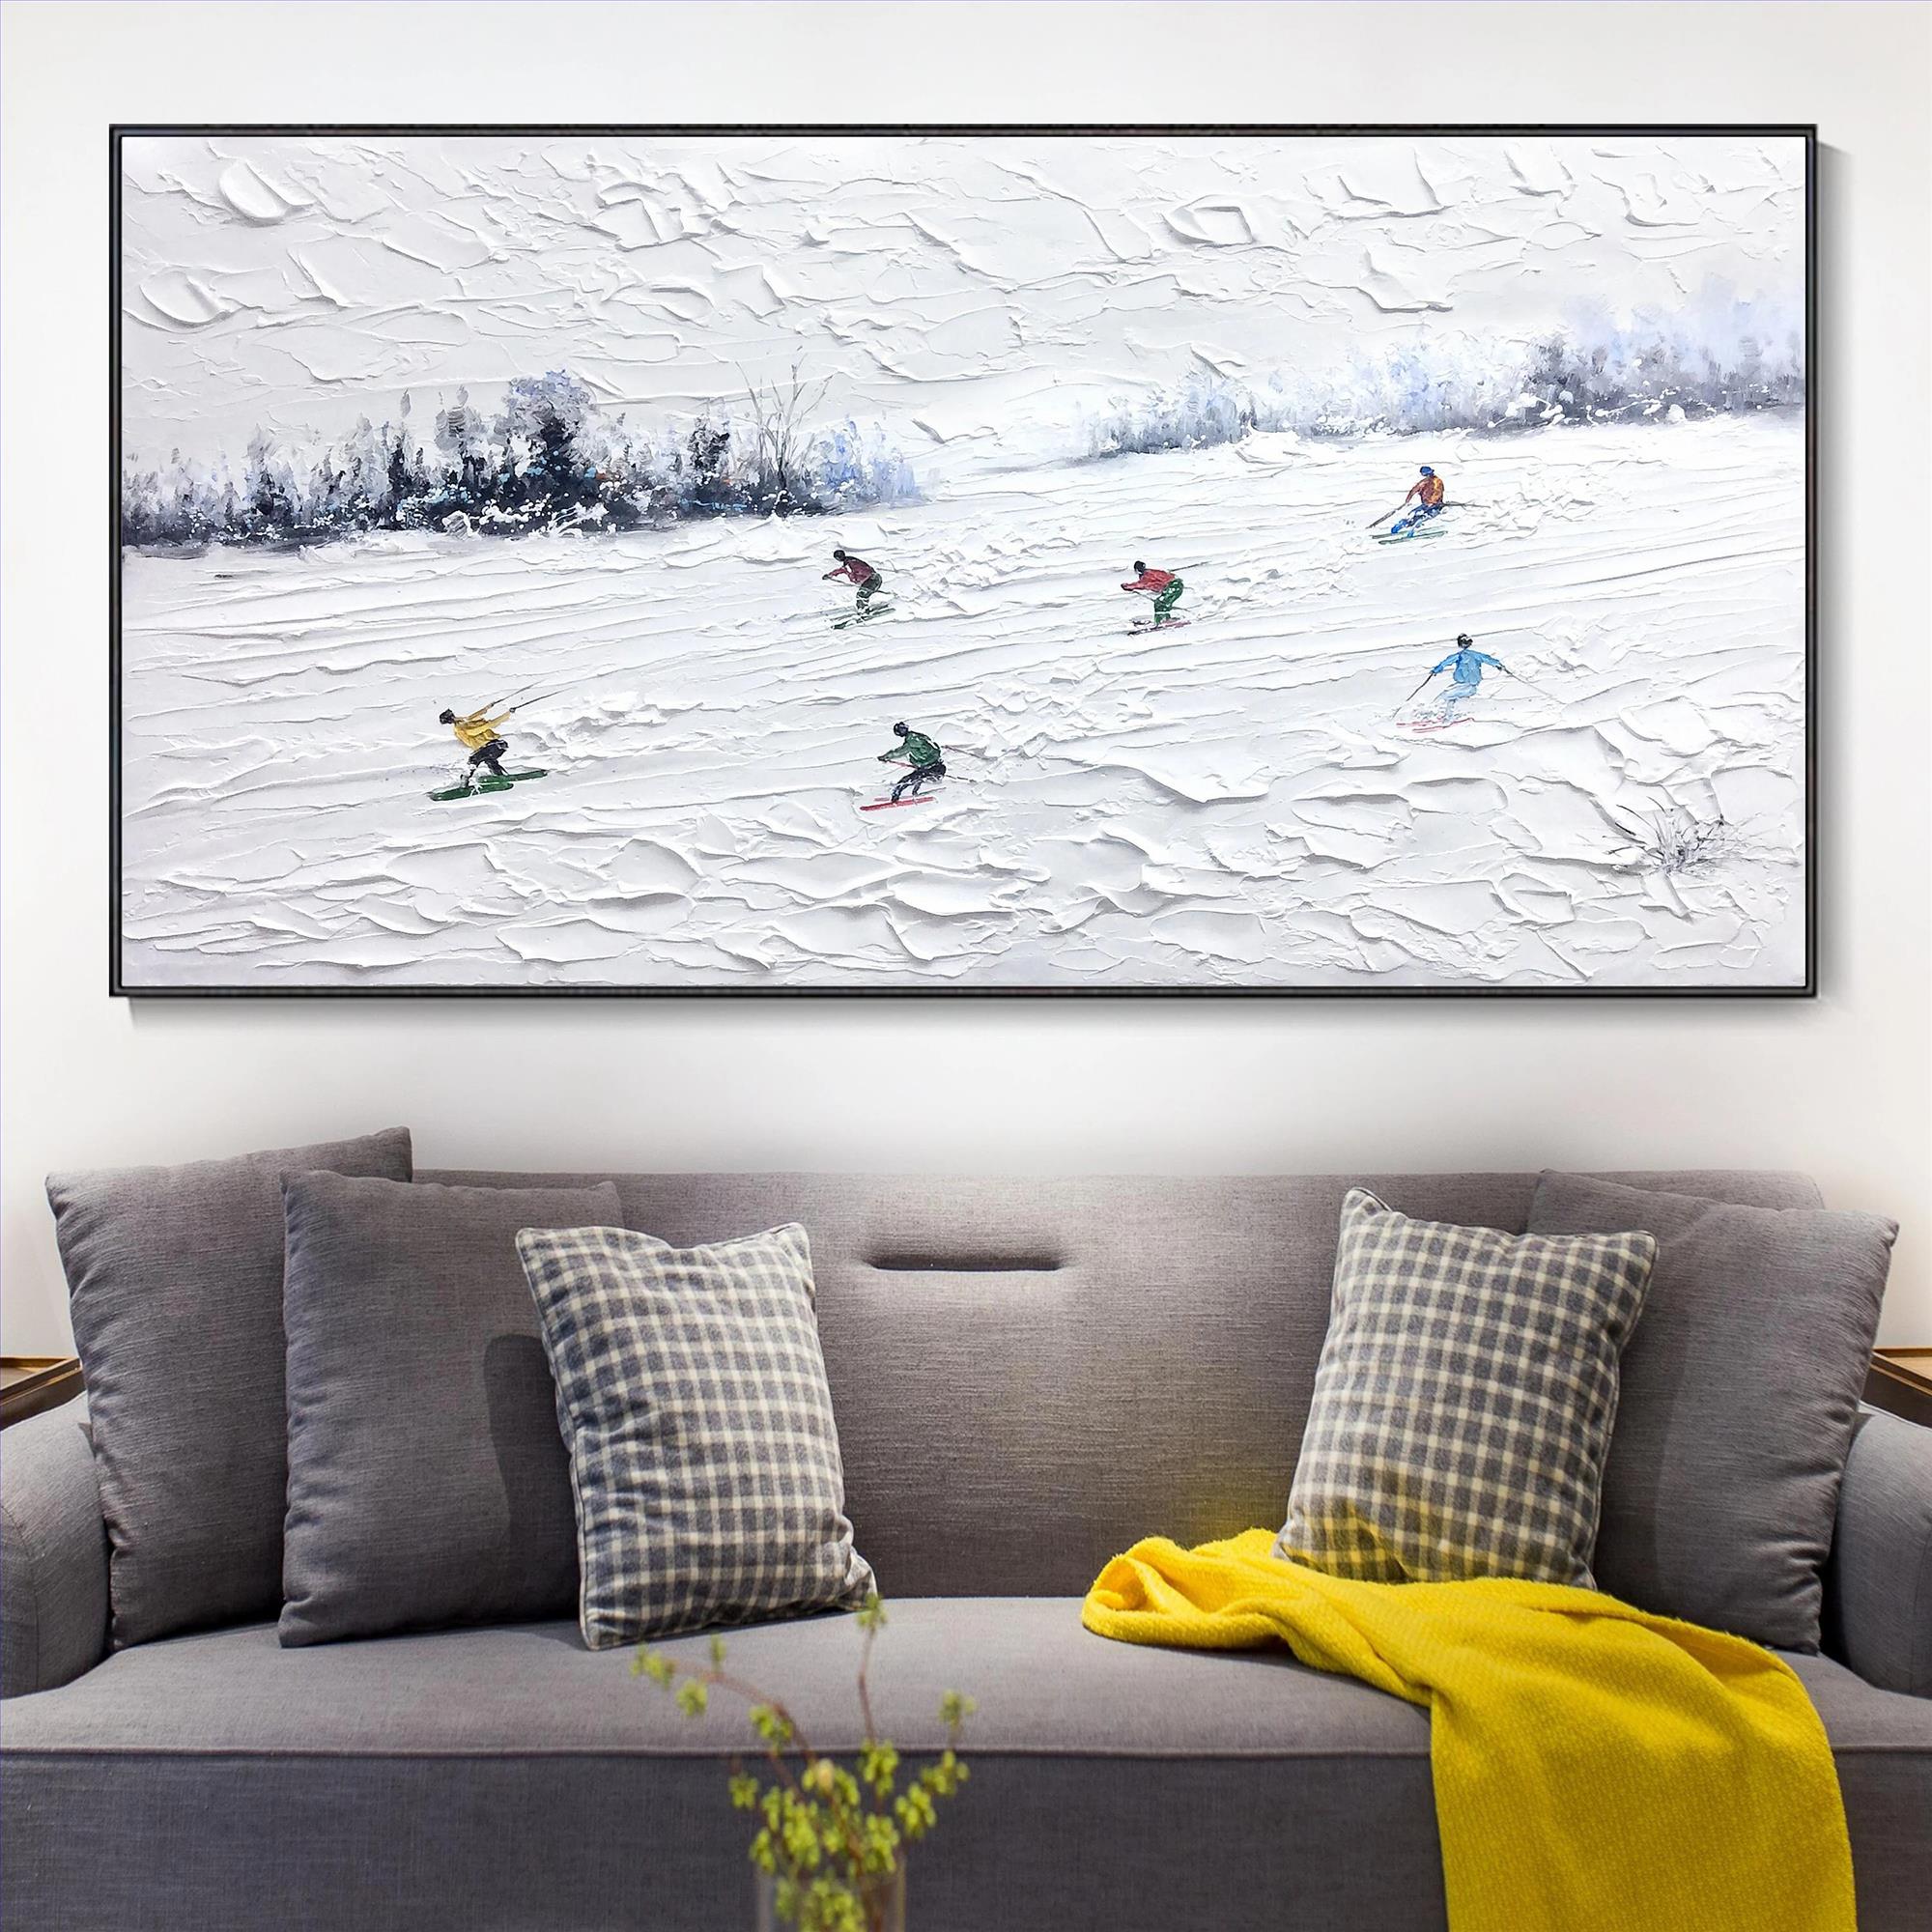 Skier on Snowy Mountain Wall Art Sport White Snow Skiing Room Decor by Knife 19 Oil Paintings